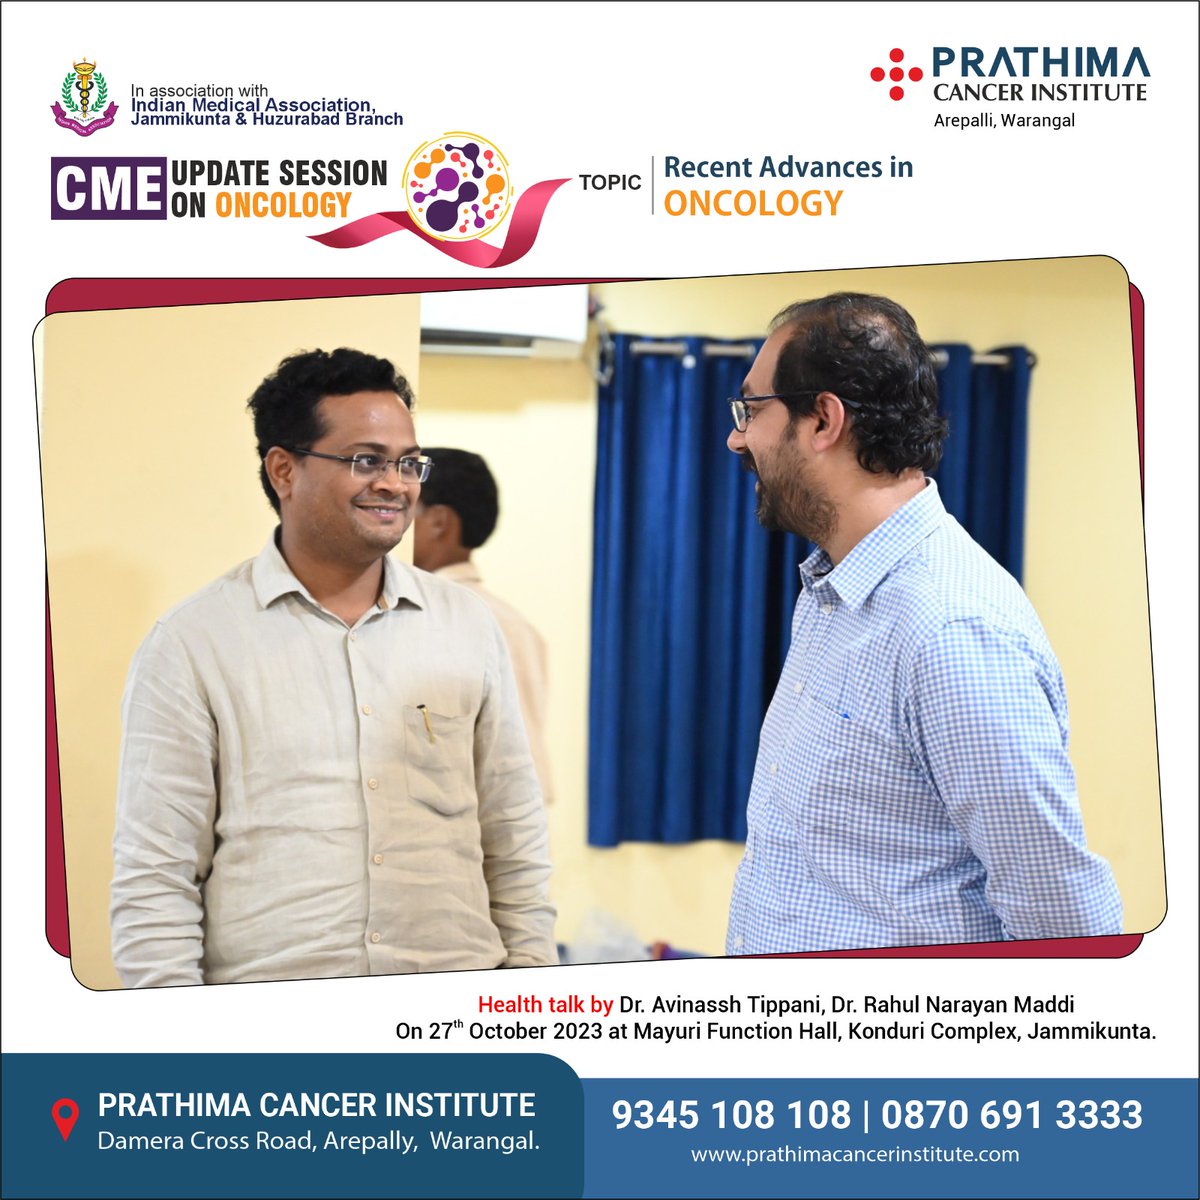 #CME Update #Session on 'Recent Advances in #ONCOLOGY' addressed by Dr. Avinash Tippani, Cheif #SurgicalOncologist & Dr. Rahul Narayan Maddi, Cheif #MedicalOncologist & #HematoOncologist On 27th October 2023 at Mayuri Function Hall, Konduri Complex, Jammikunta.